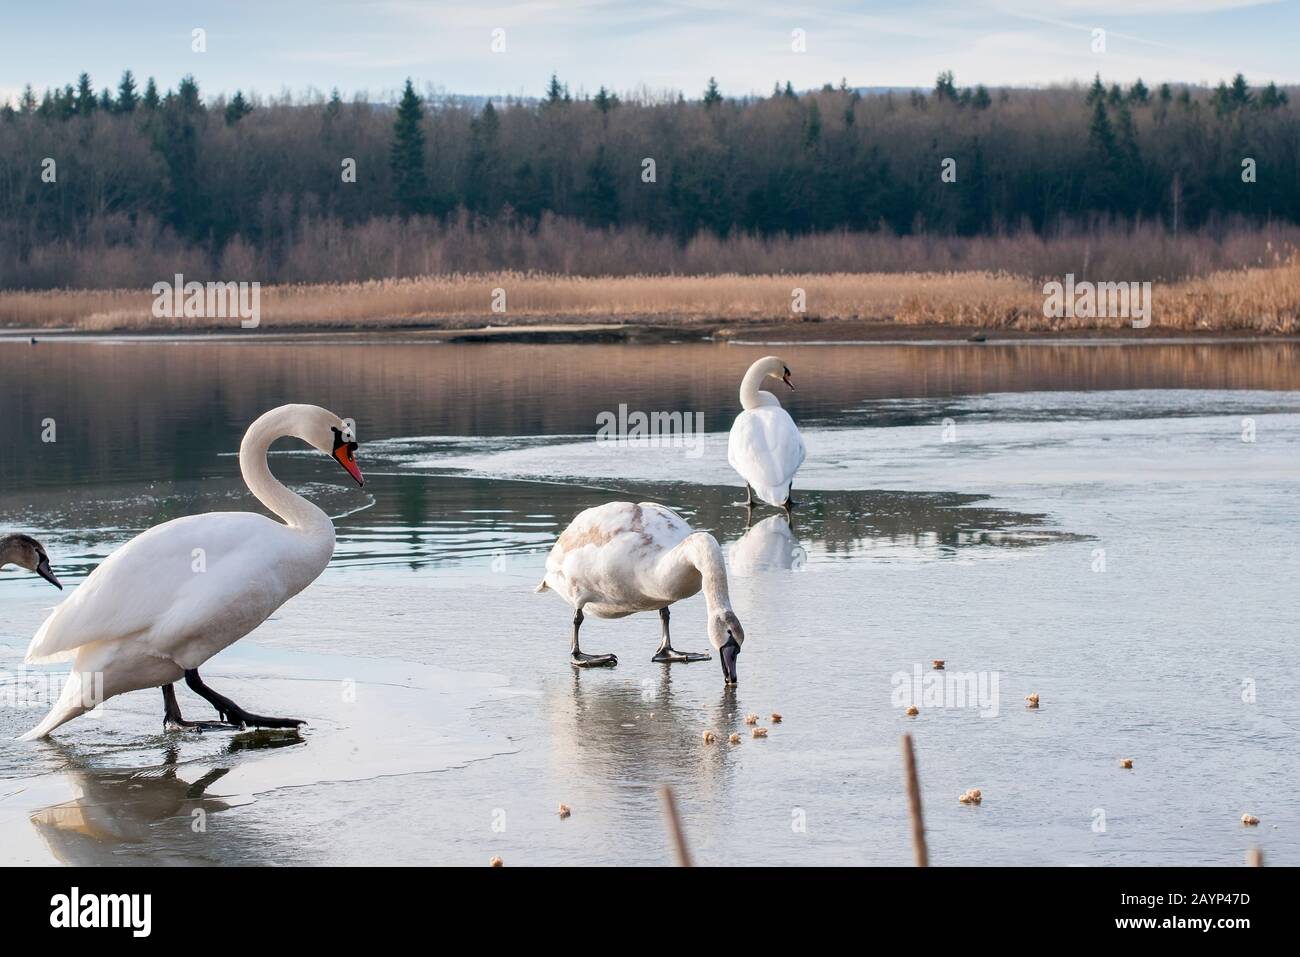 swans on an icy lake rest and swim Stock Photo